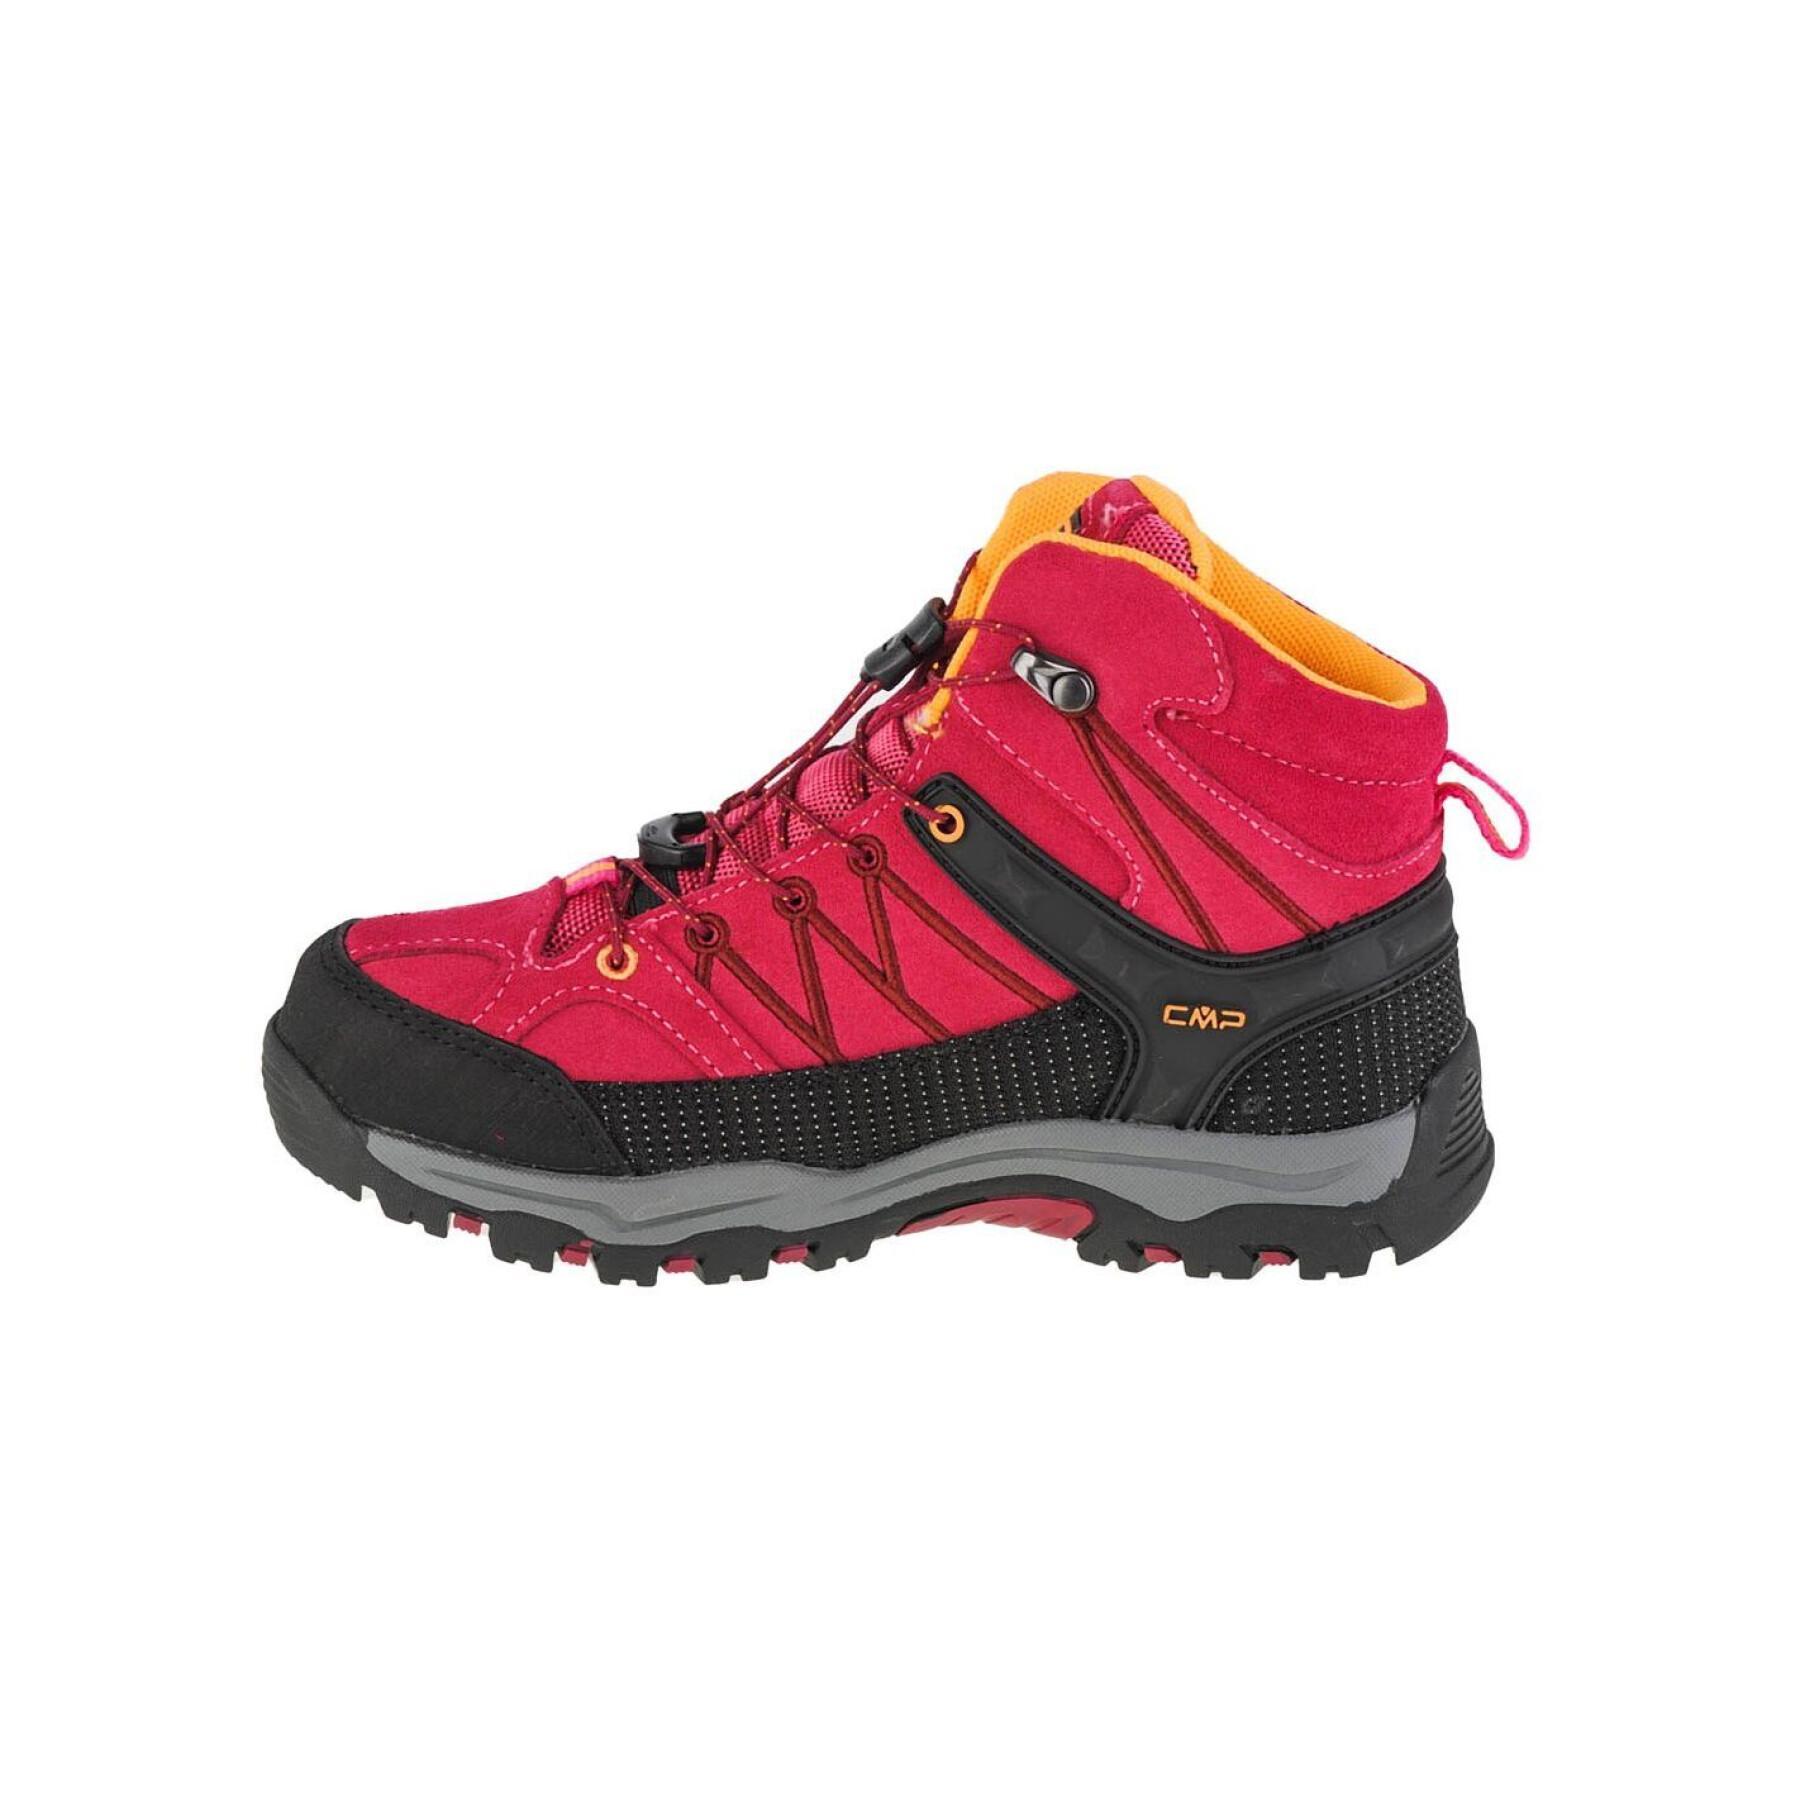 Hiking shoes for girls CMP Rigel